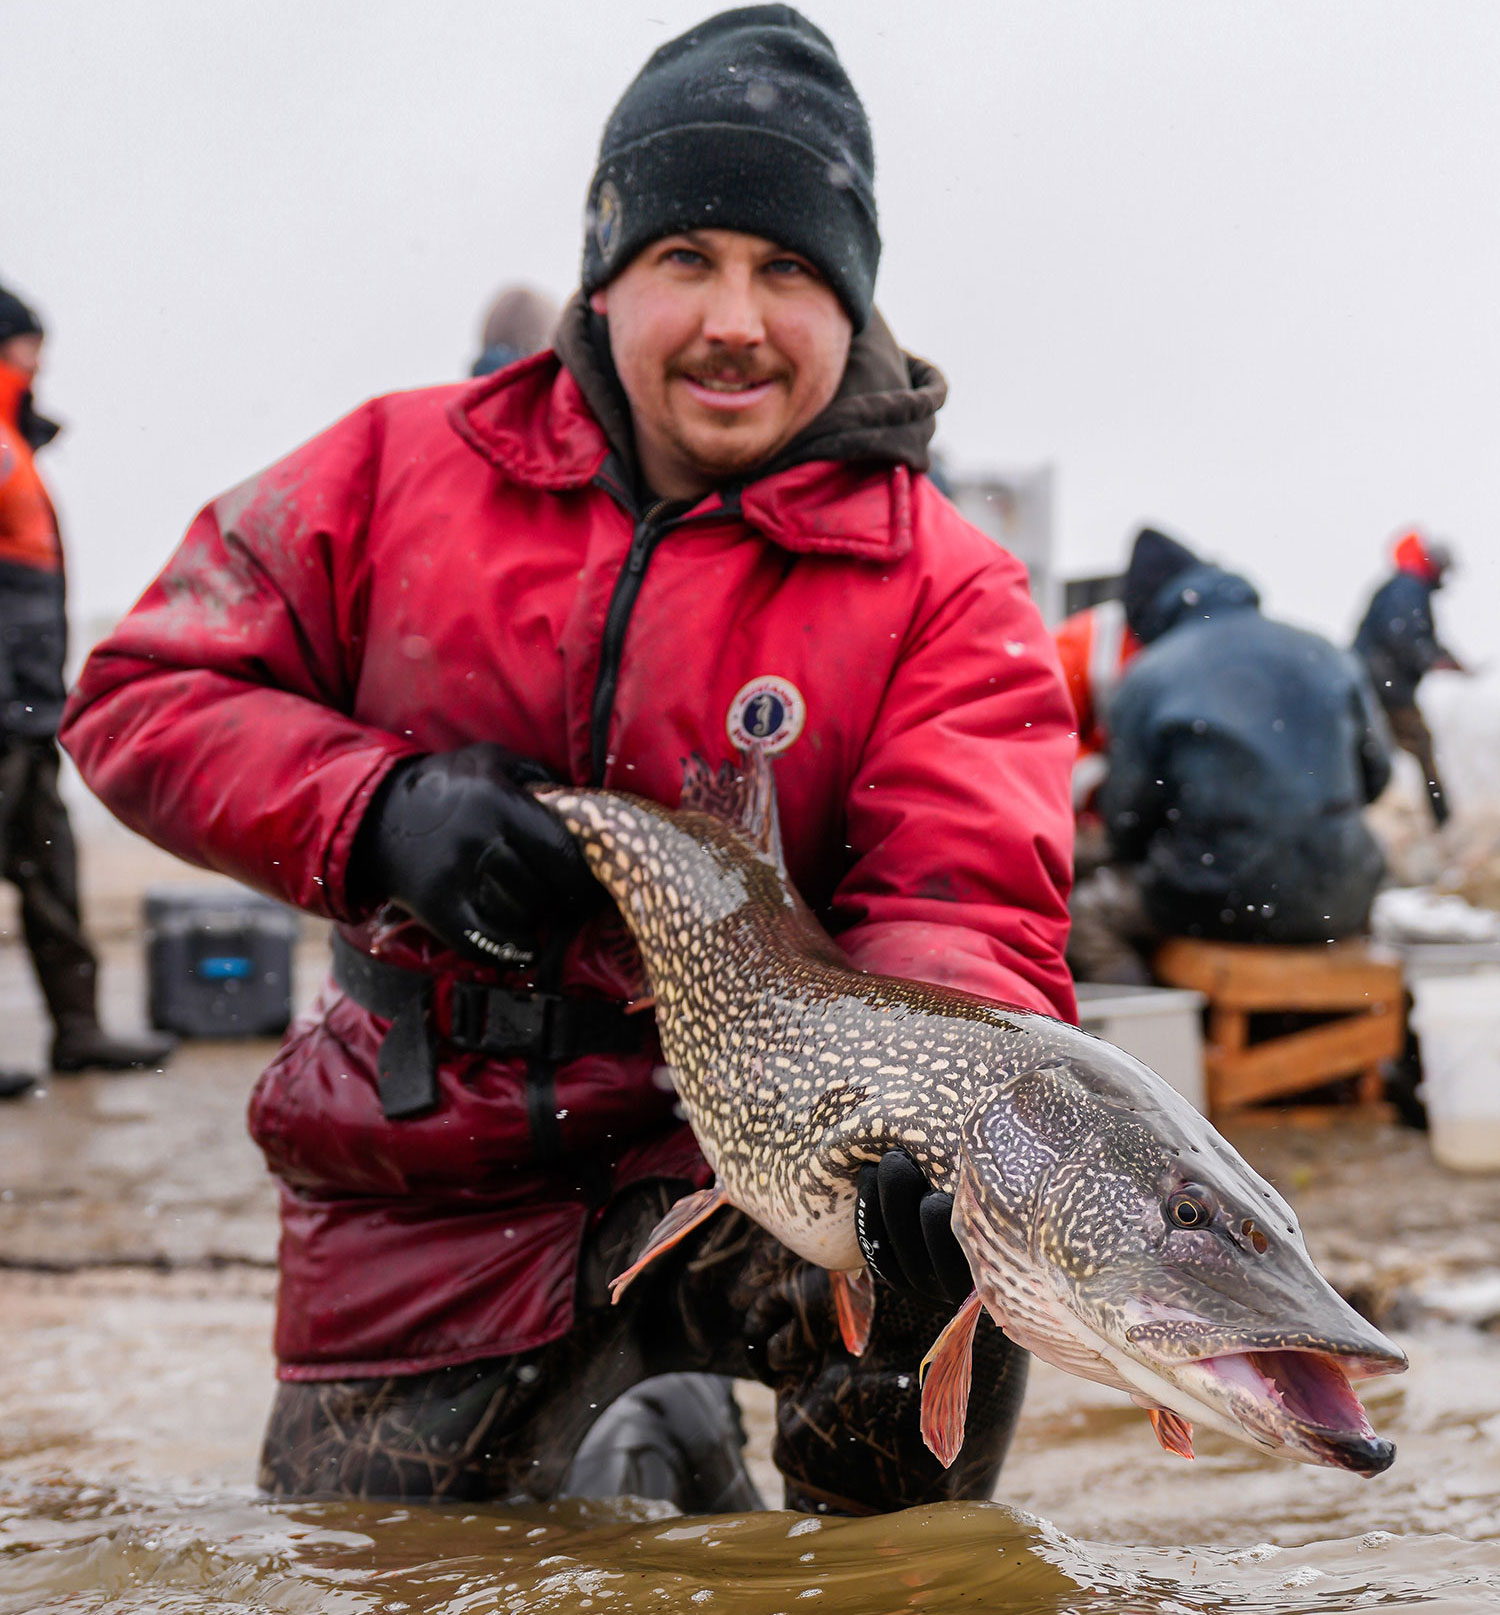 Fisheries biologist holding a northern pike he is about to release